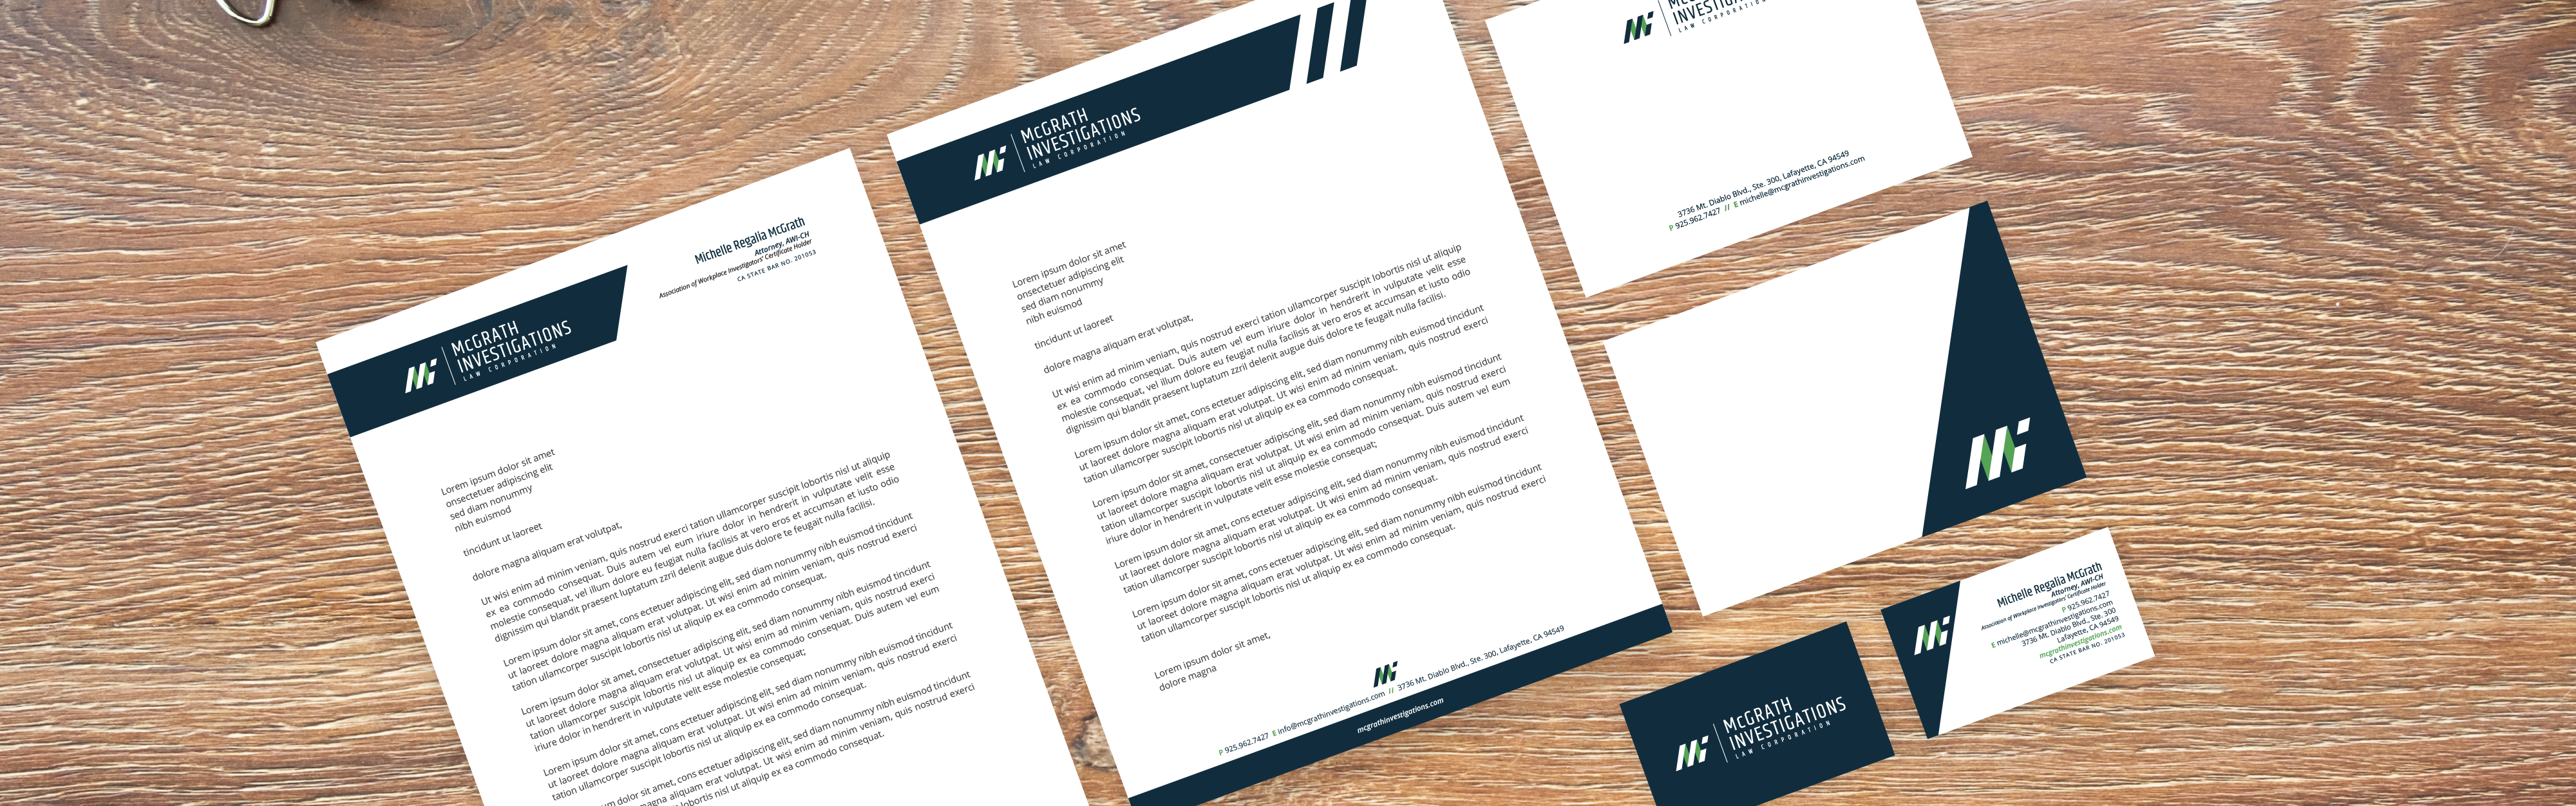 A collection of McGrath Investigations corporate stationery items, including letterheads, business cards, and envelopes, laid out on a wooden surface, showcasing a cohesive brand design.